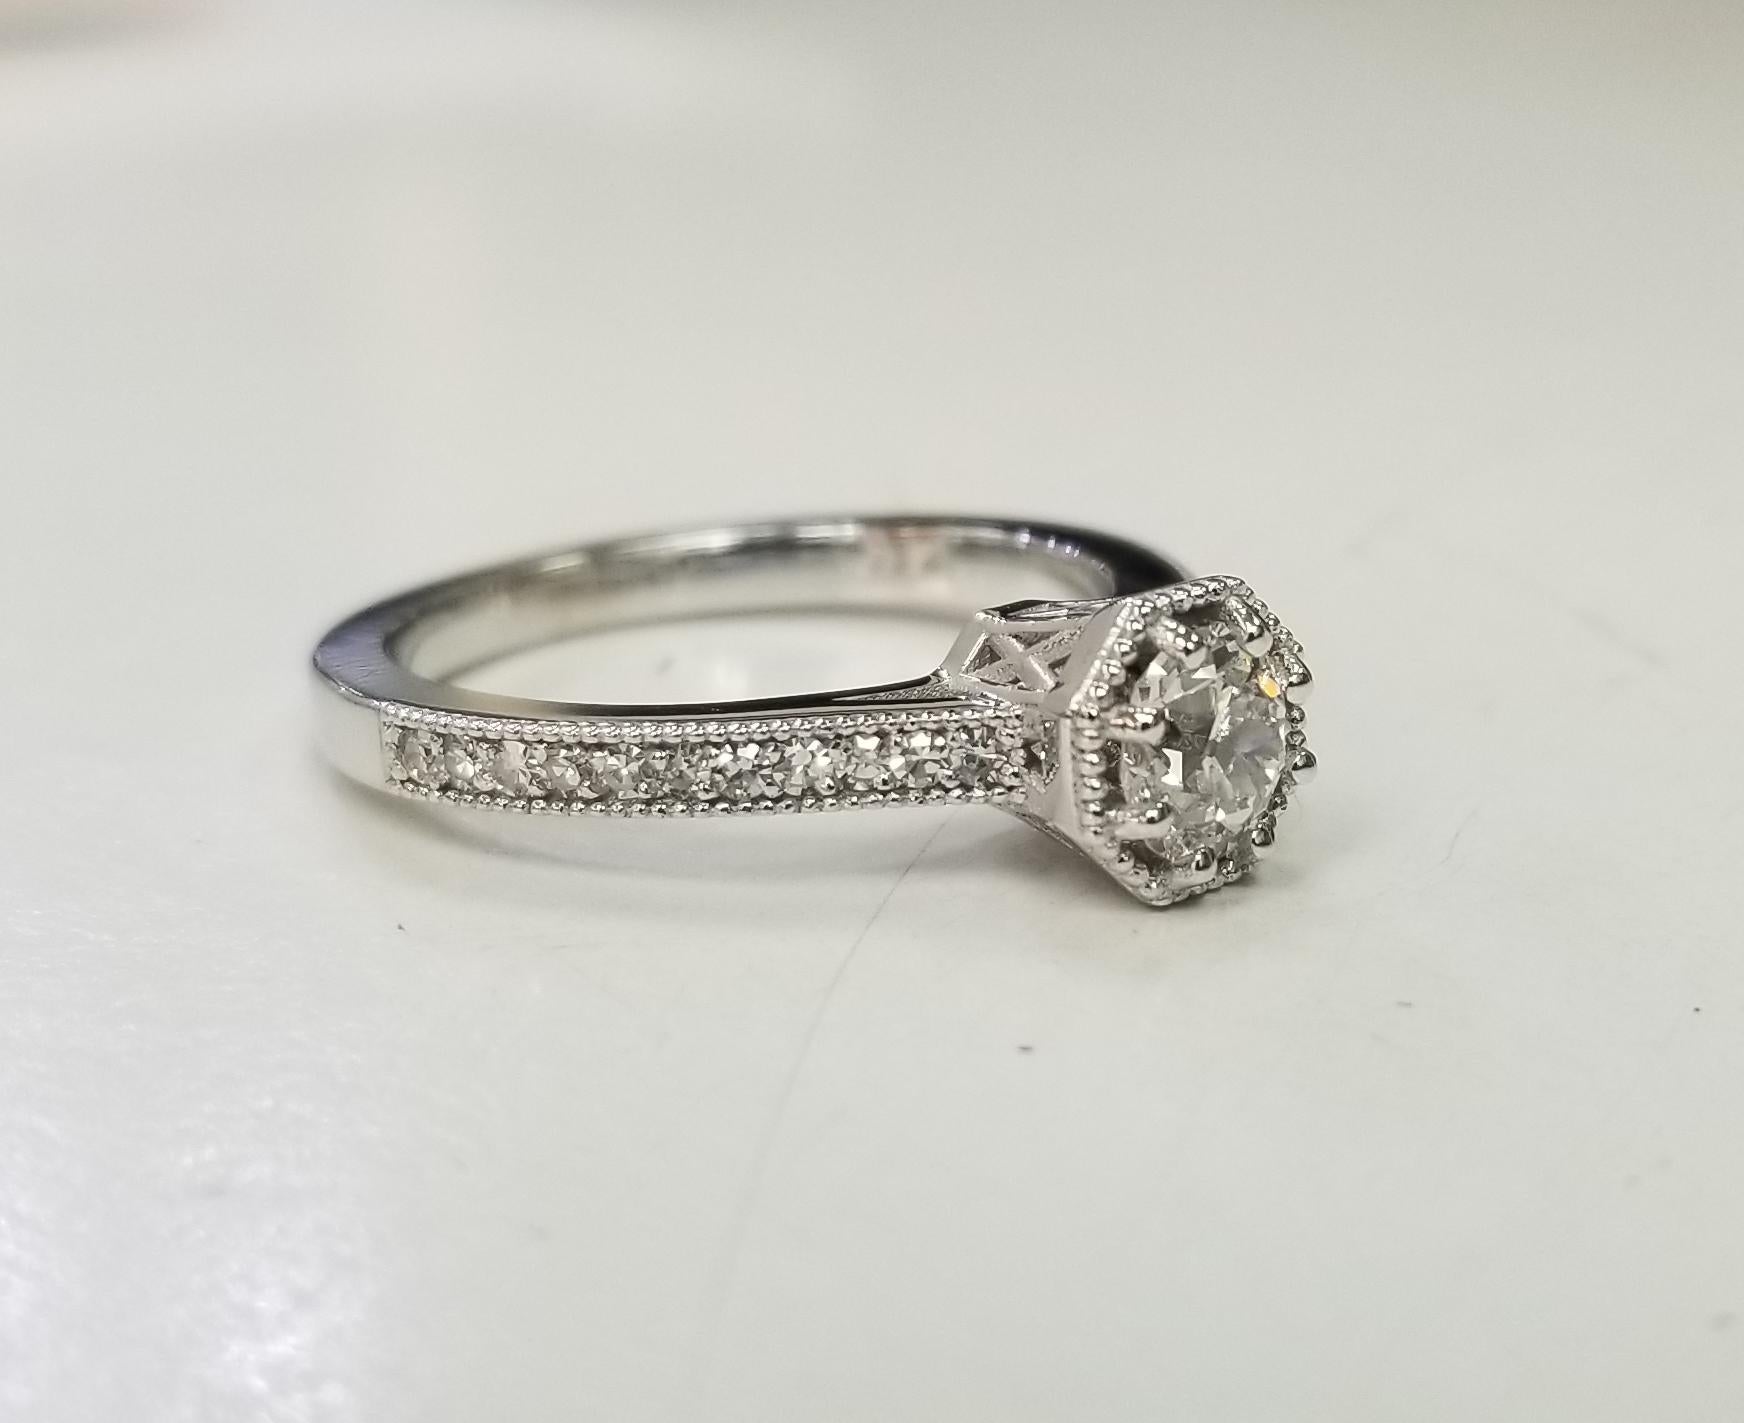 Specifications:
    main stone: GIA Certified Euro Cut .55 CARAT (GIA #6203553898)
    main stone: Diamond color D and clarity VS2
    carat total weight: .20
      metal: 14k white gold
    type: ENGAGEMENT ring
    weight:  4Grams
    size: 6.75 US